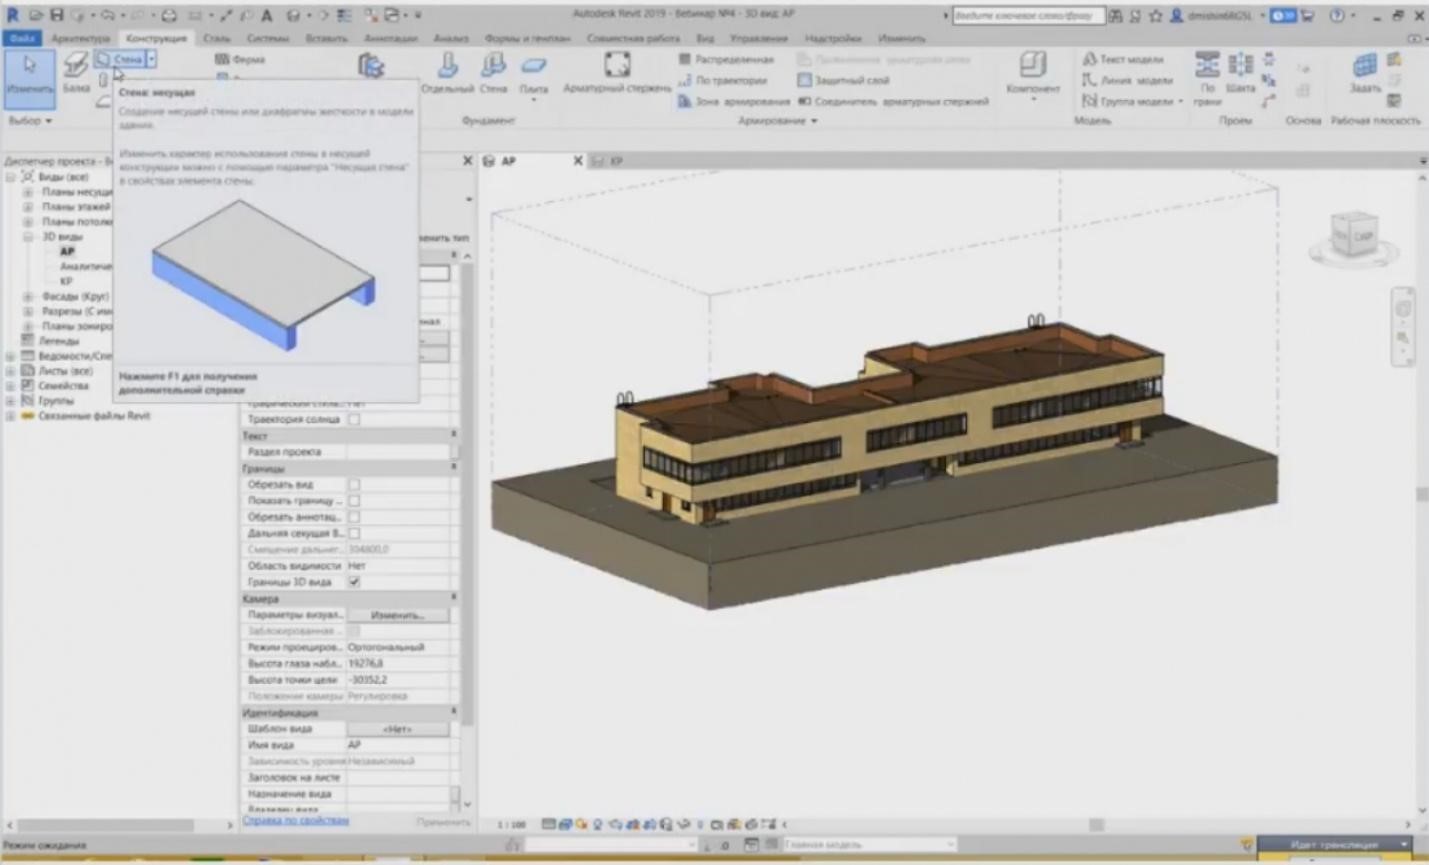 BIM DESIGN IN REVIT. CREATING ARCHITECTURAL AND STRUCTURAL ELEMENTS-3